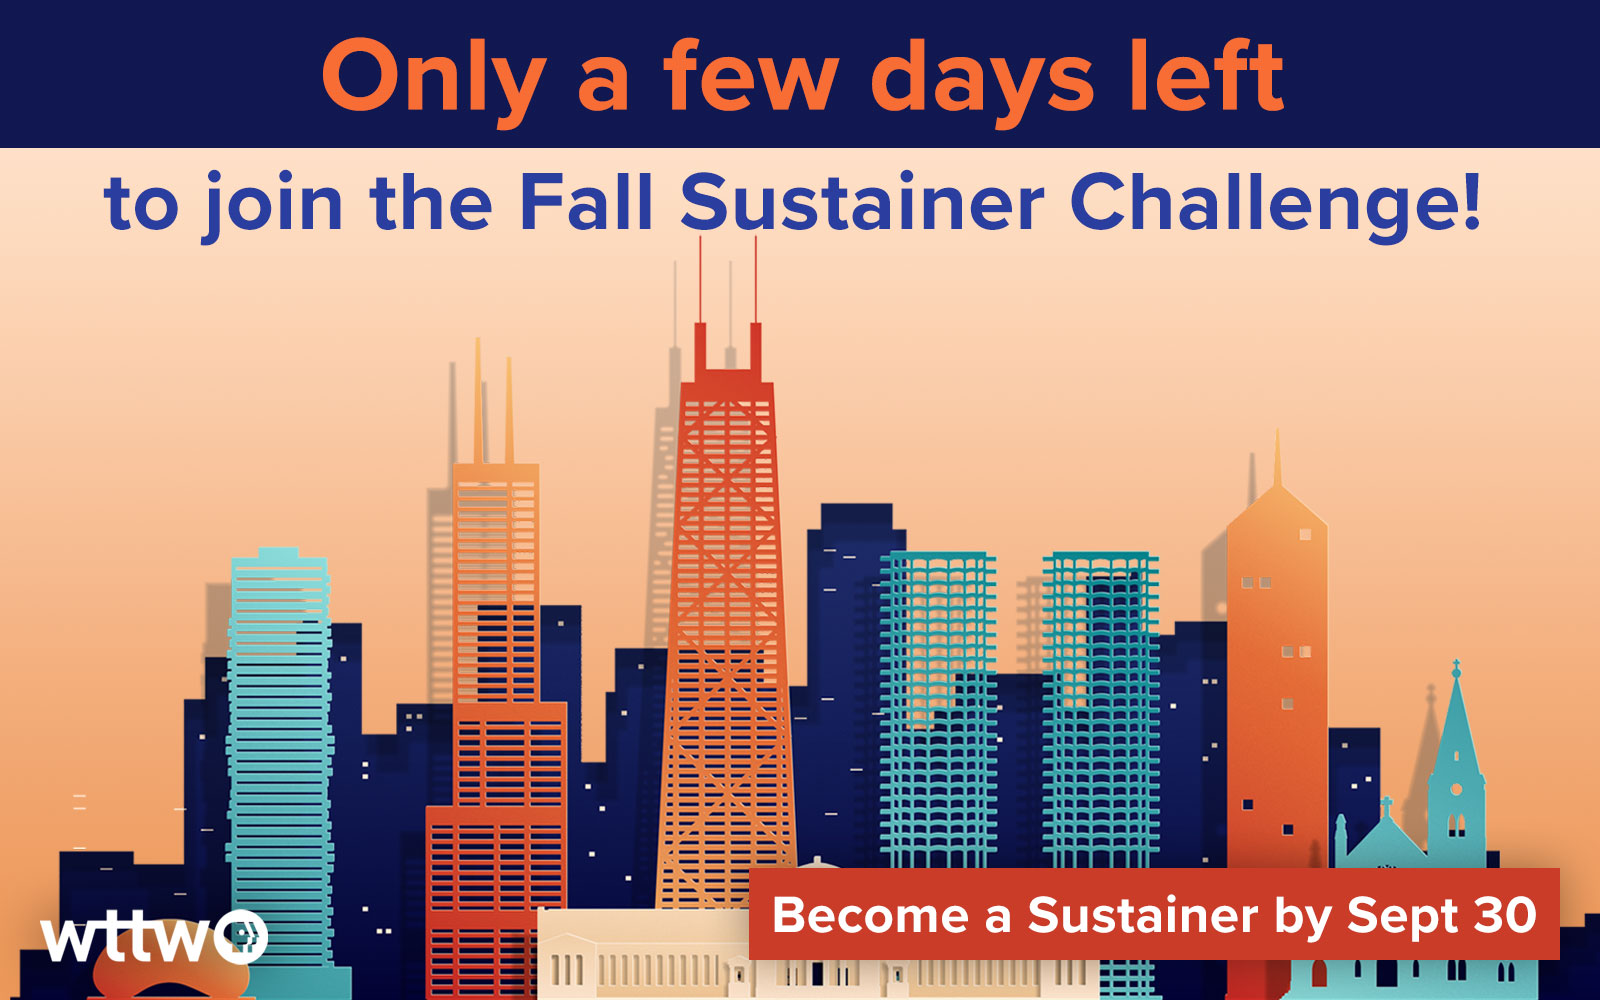 Take the Fall Sustainer Challenge